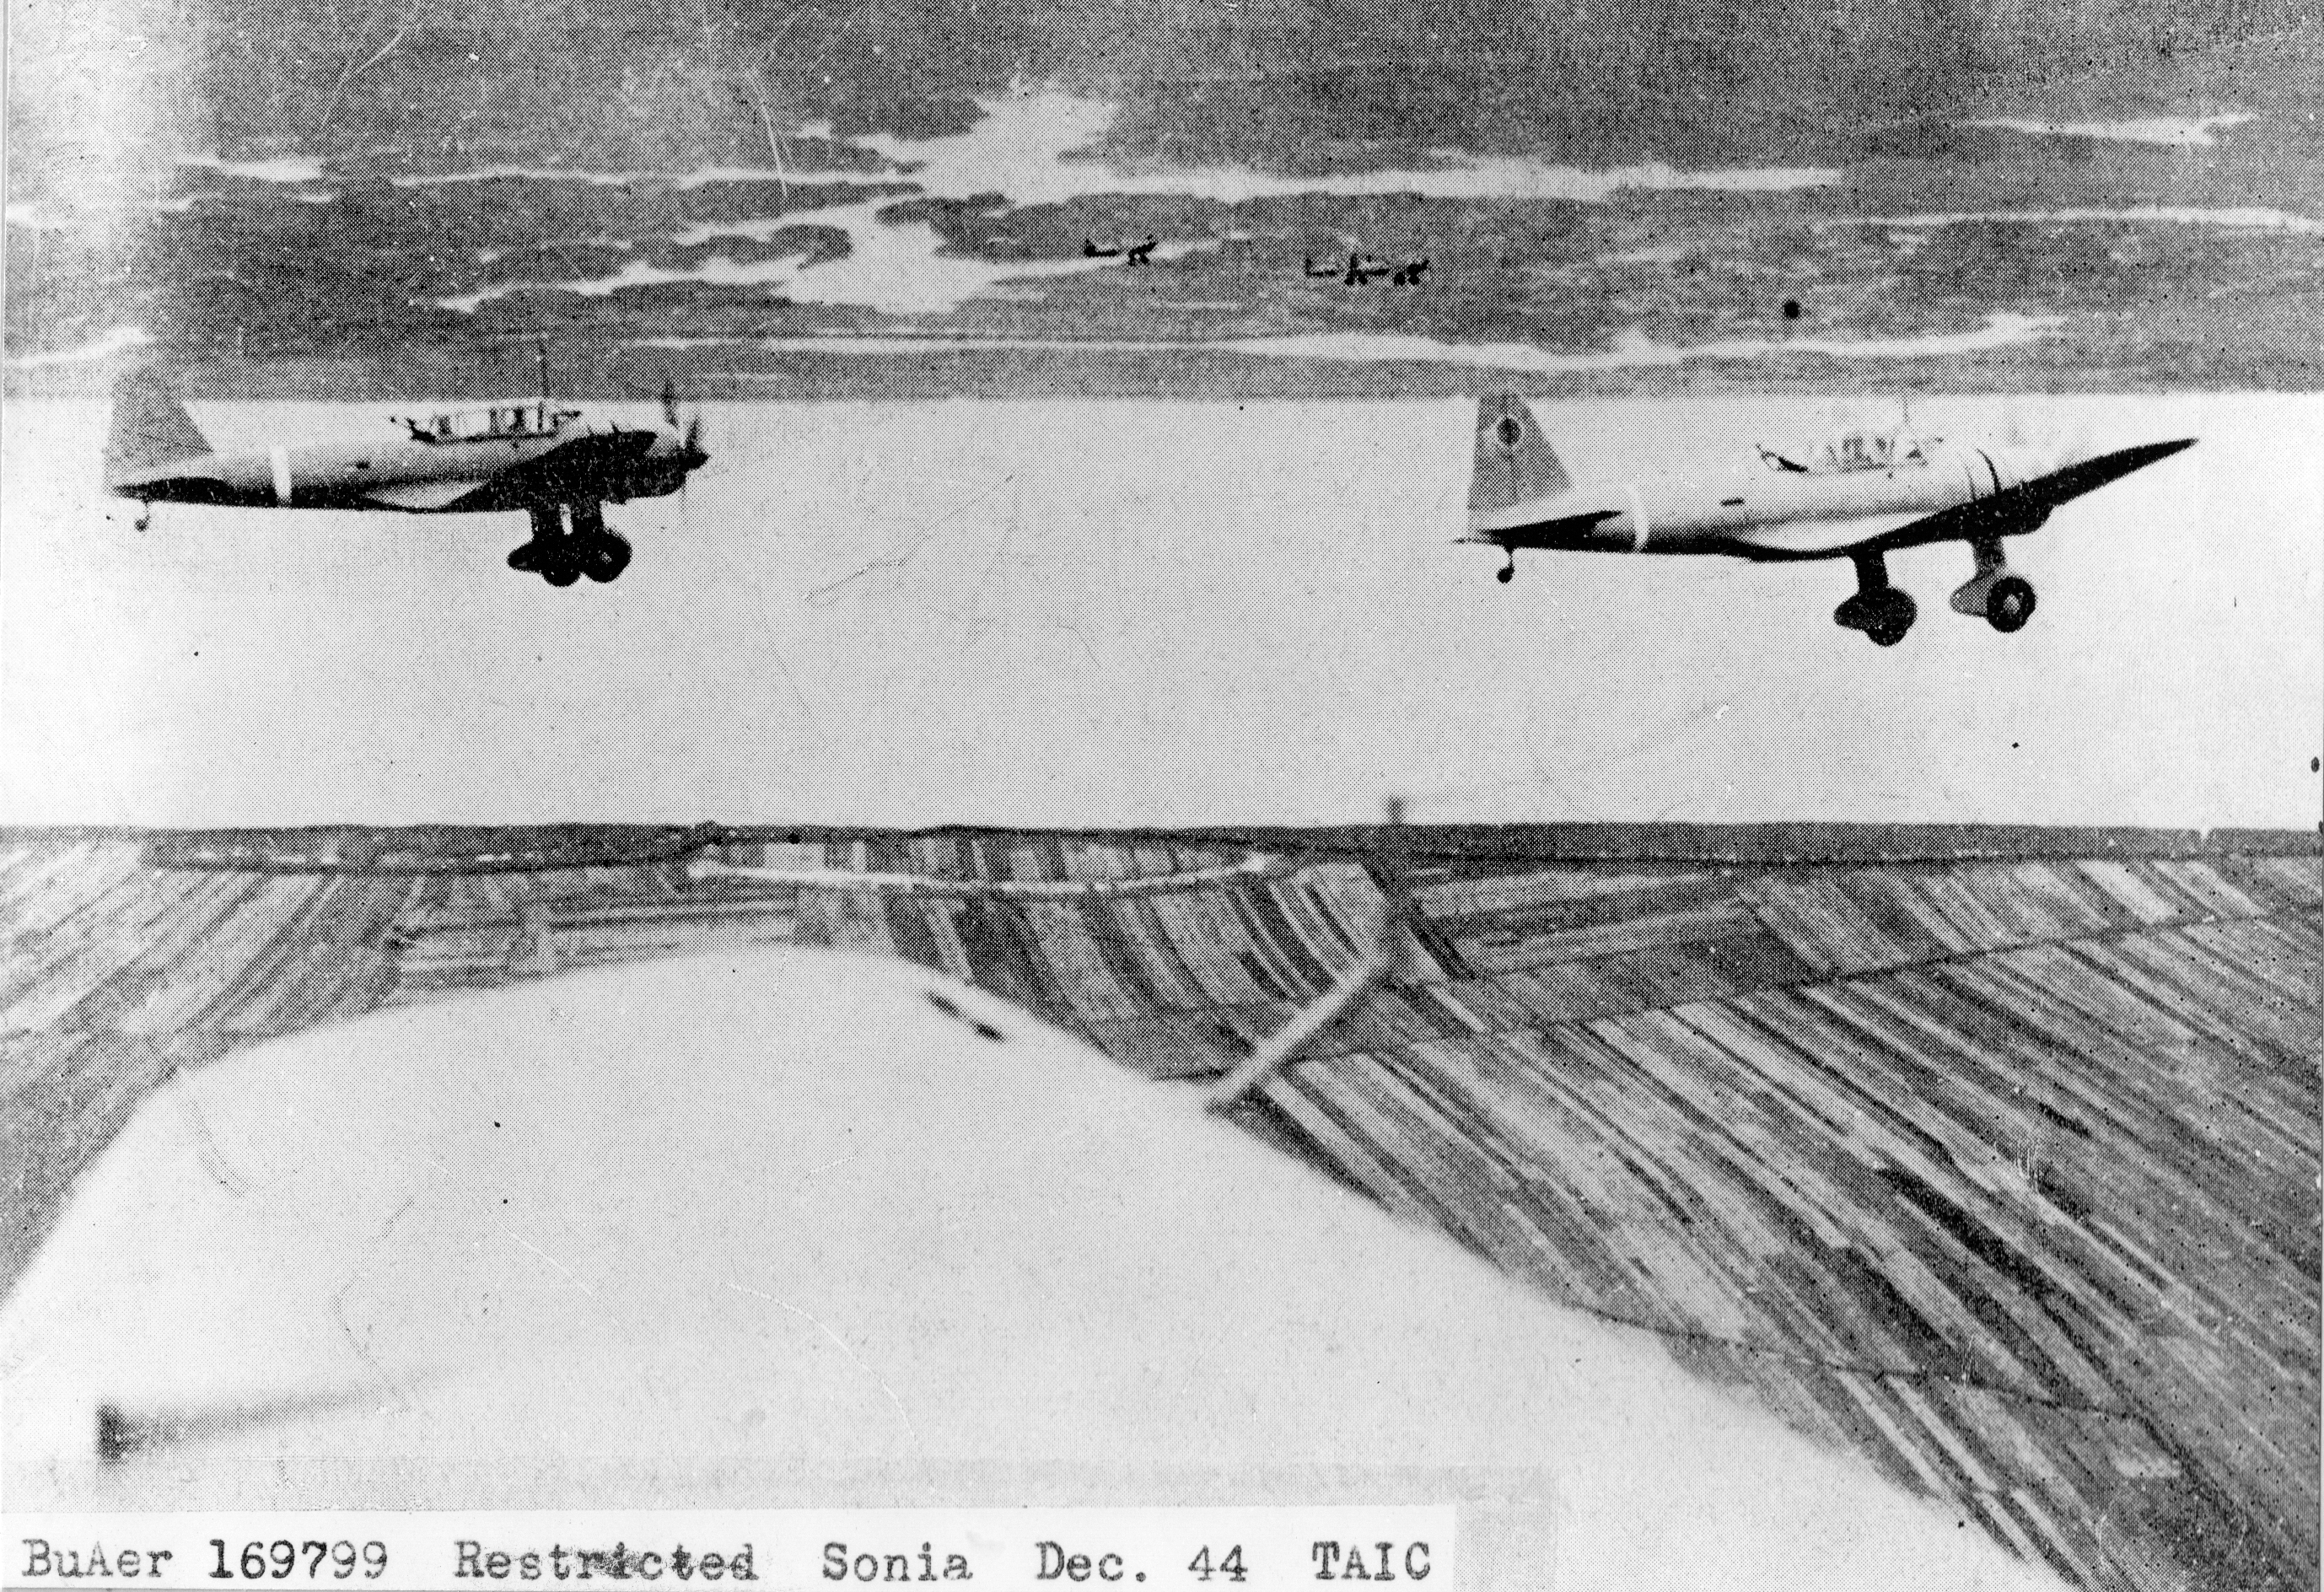 Type 99 (Sonia) attack bombers were frequently misidentified as navy Val dive bombers